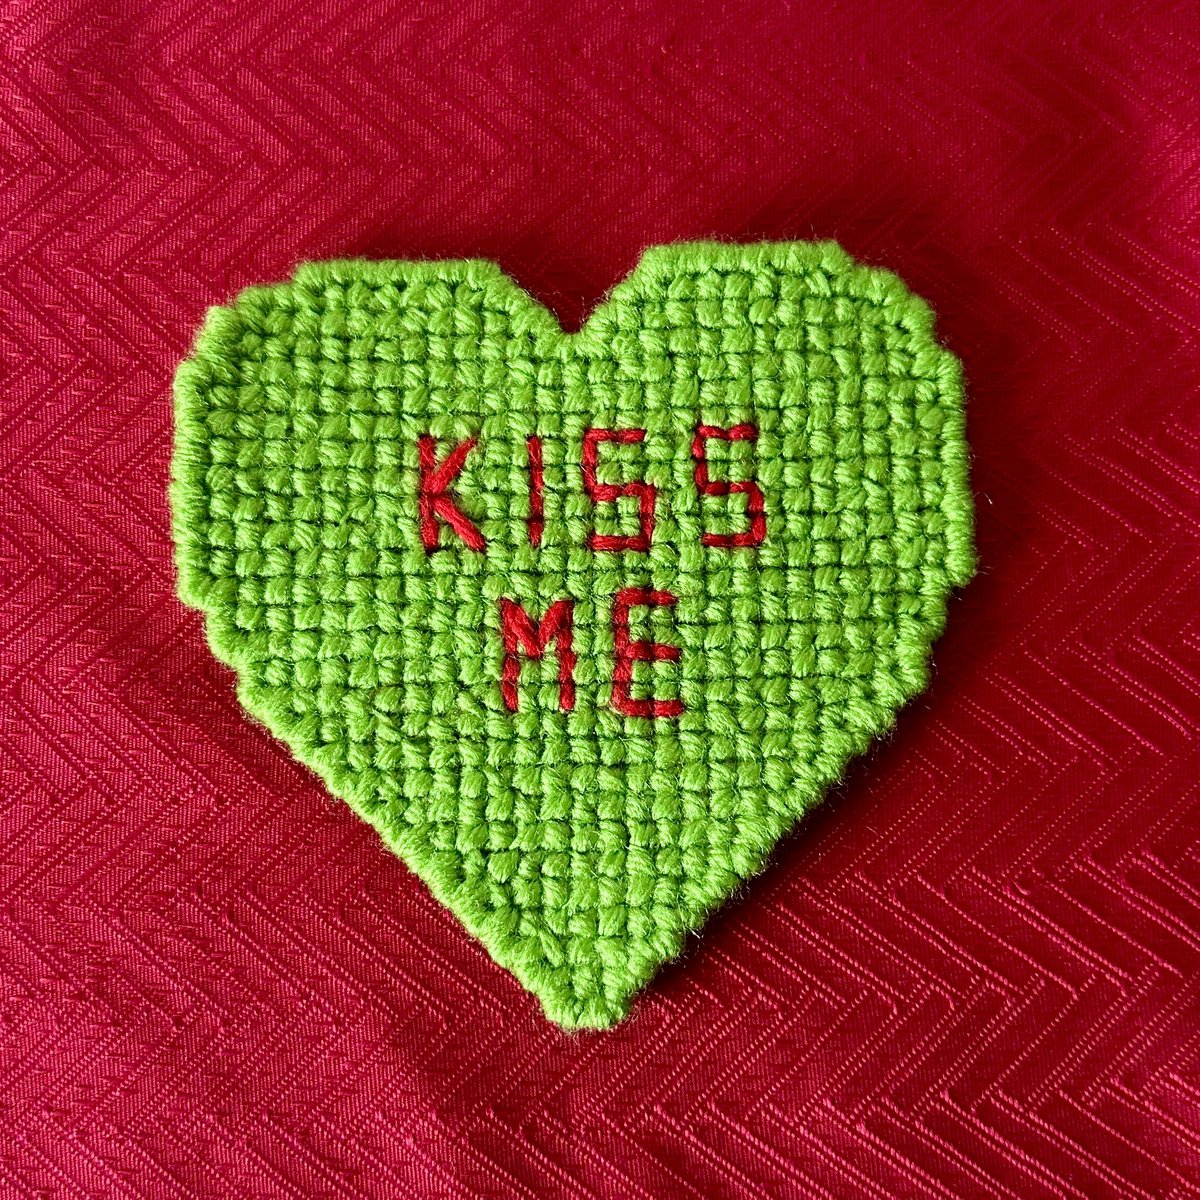 Sweethearts Candy Coaster 
{Green - Kiss Me} 

Shop available coasters and coaster sets in my Square shop: 
justaskcassie.square.site/shop/coasters/8

#sweethearts #sweetheart #valentinesday #valentinesdaydecor #sweetheartscandy #greenheart #greensweetheart #coasters #beveragecoaster #drinkcoaster